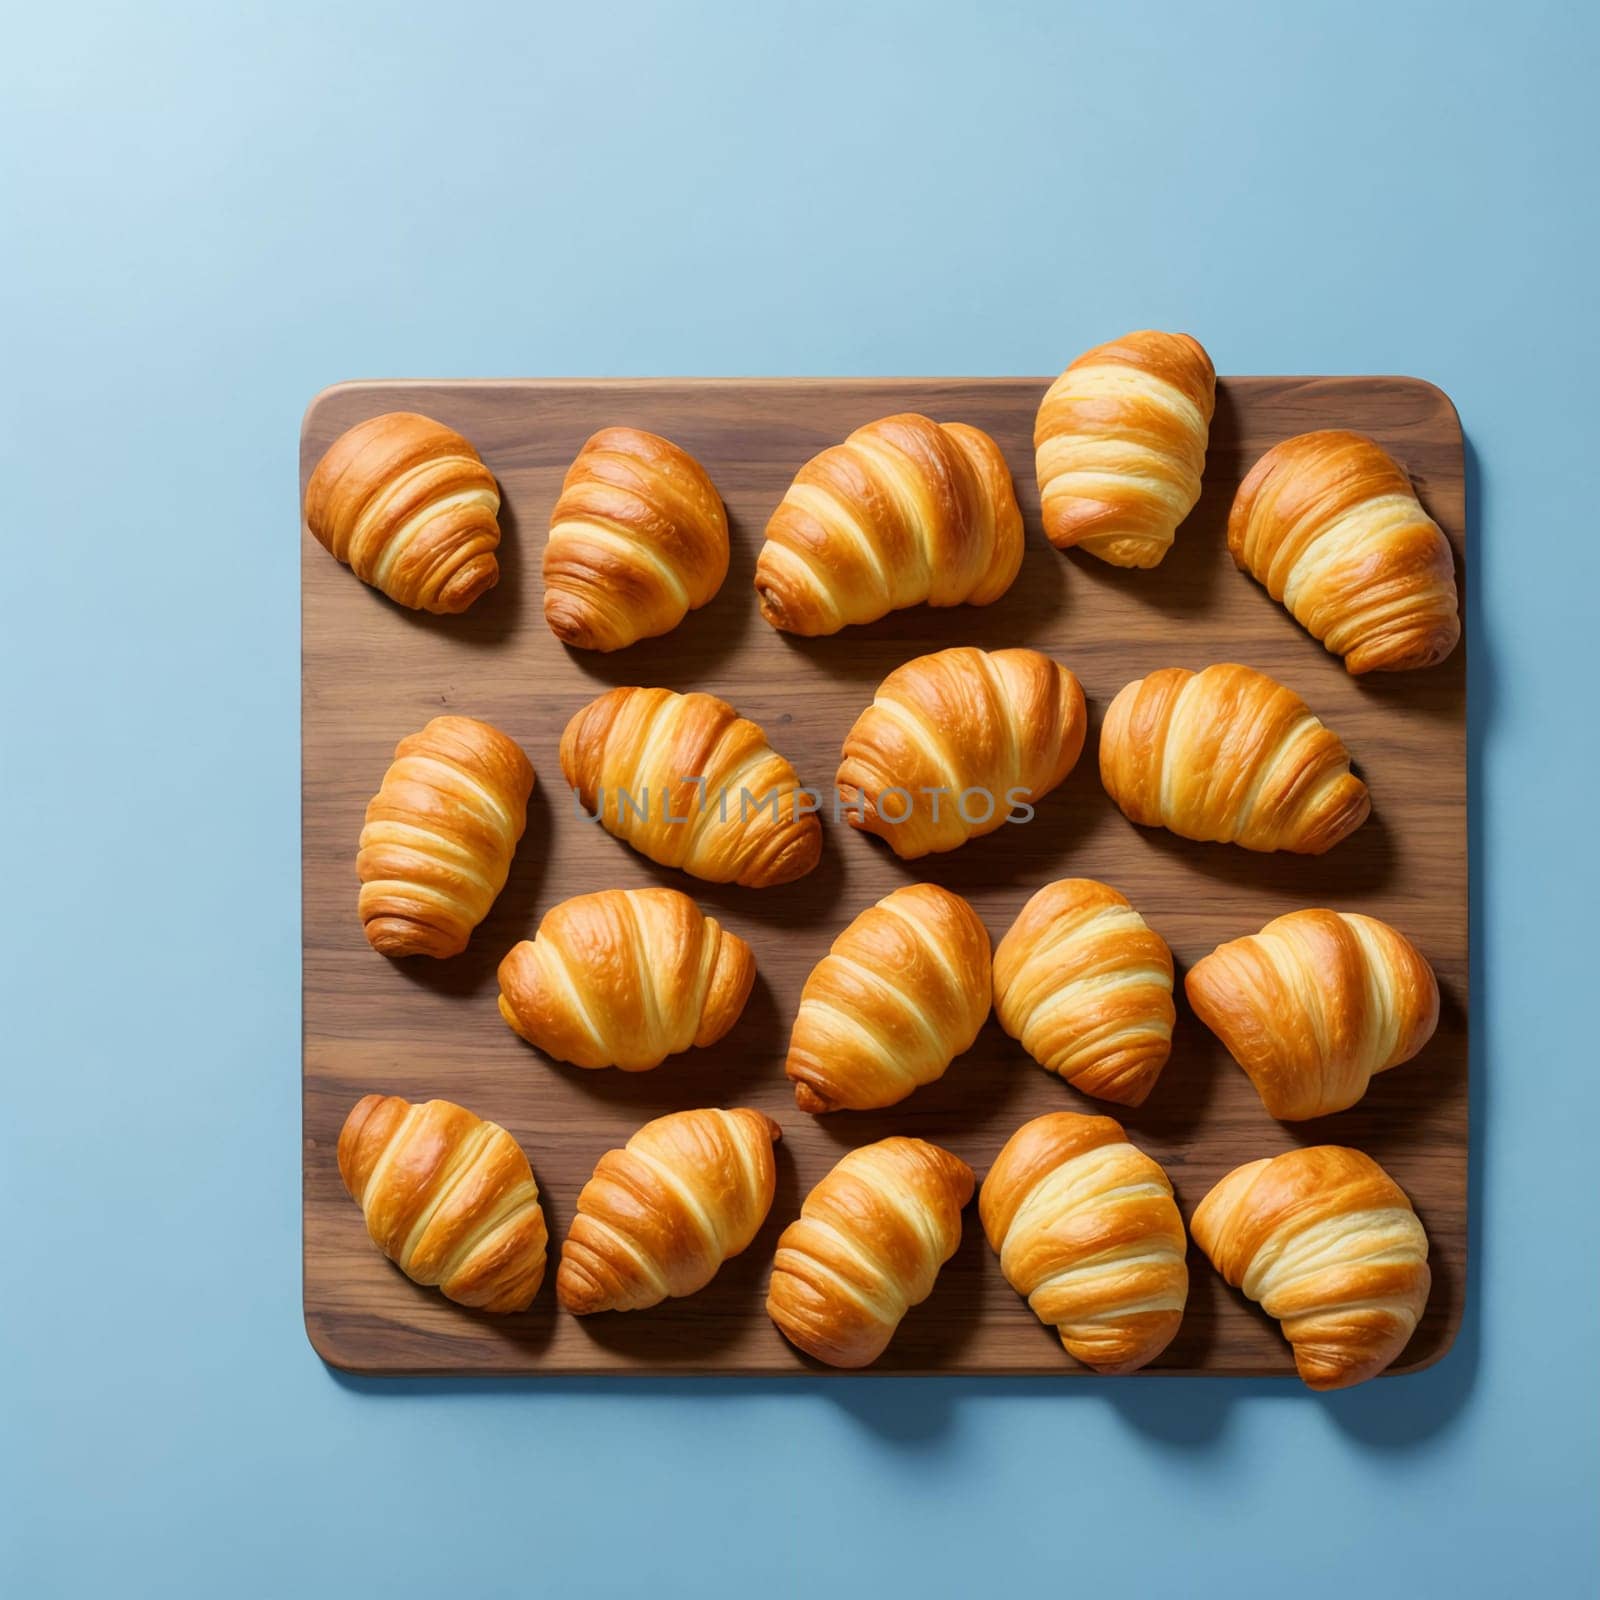 Freshly baked croissants on a wooden board on a blue background by Севостьянов